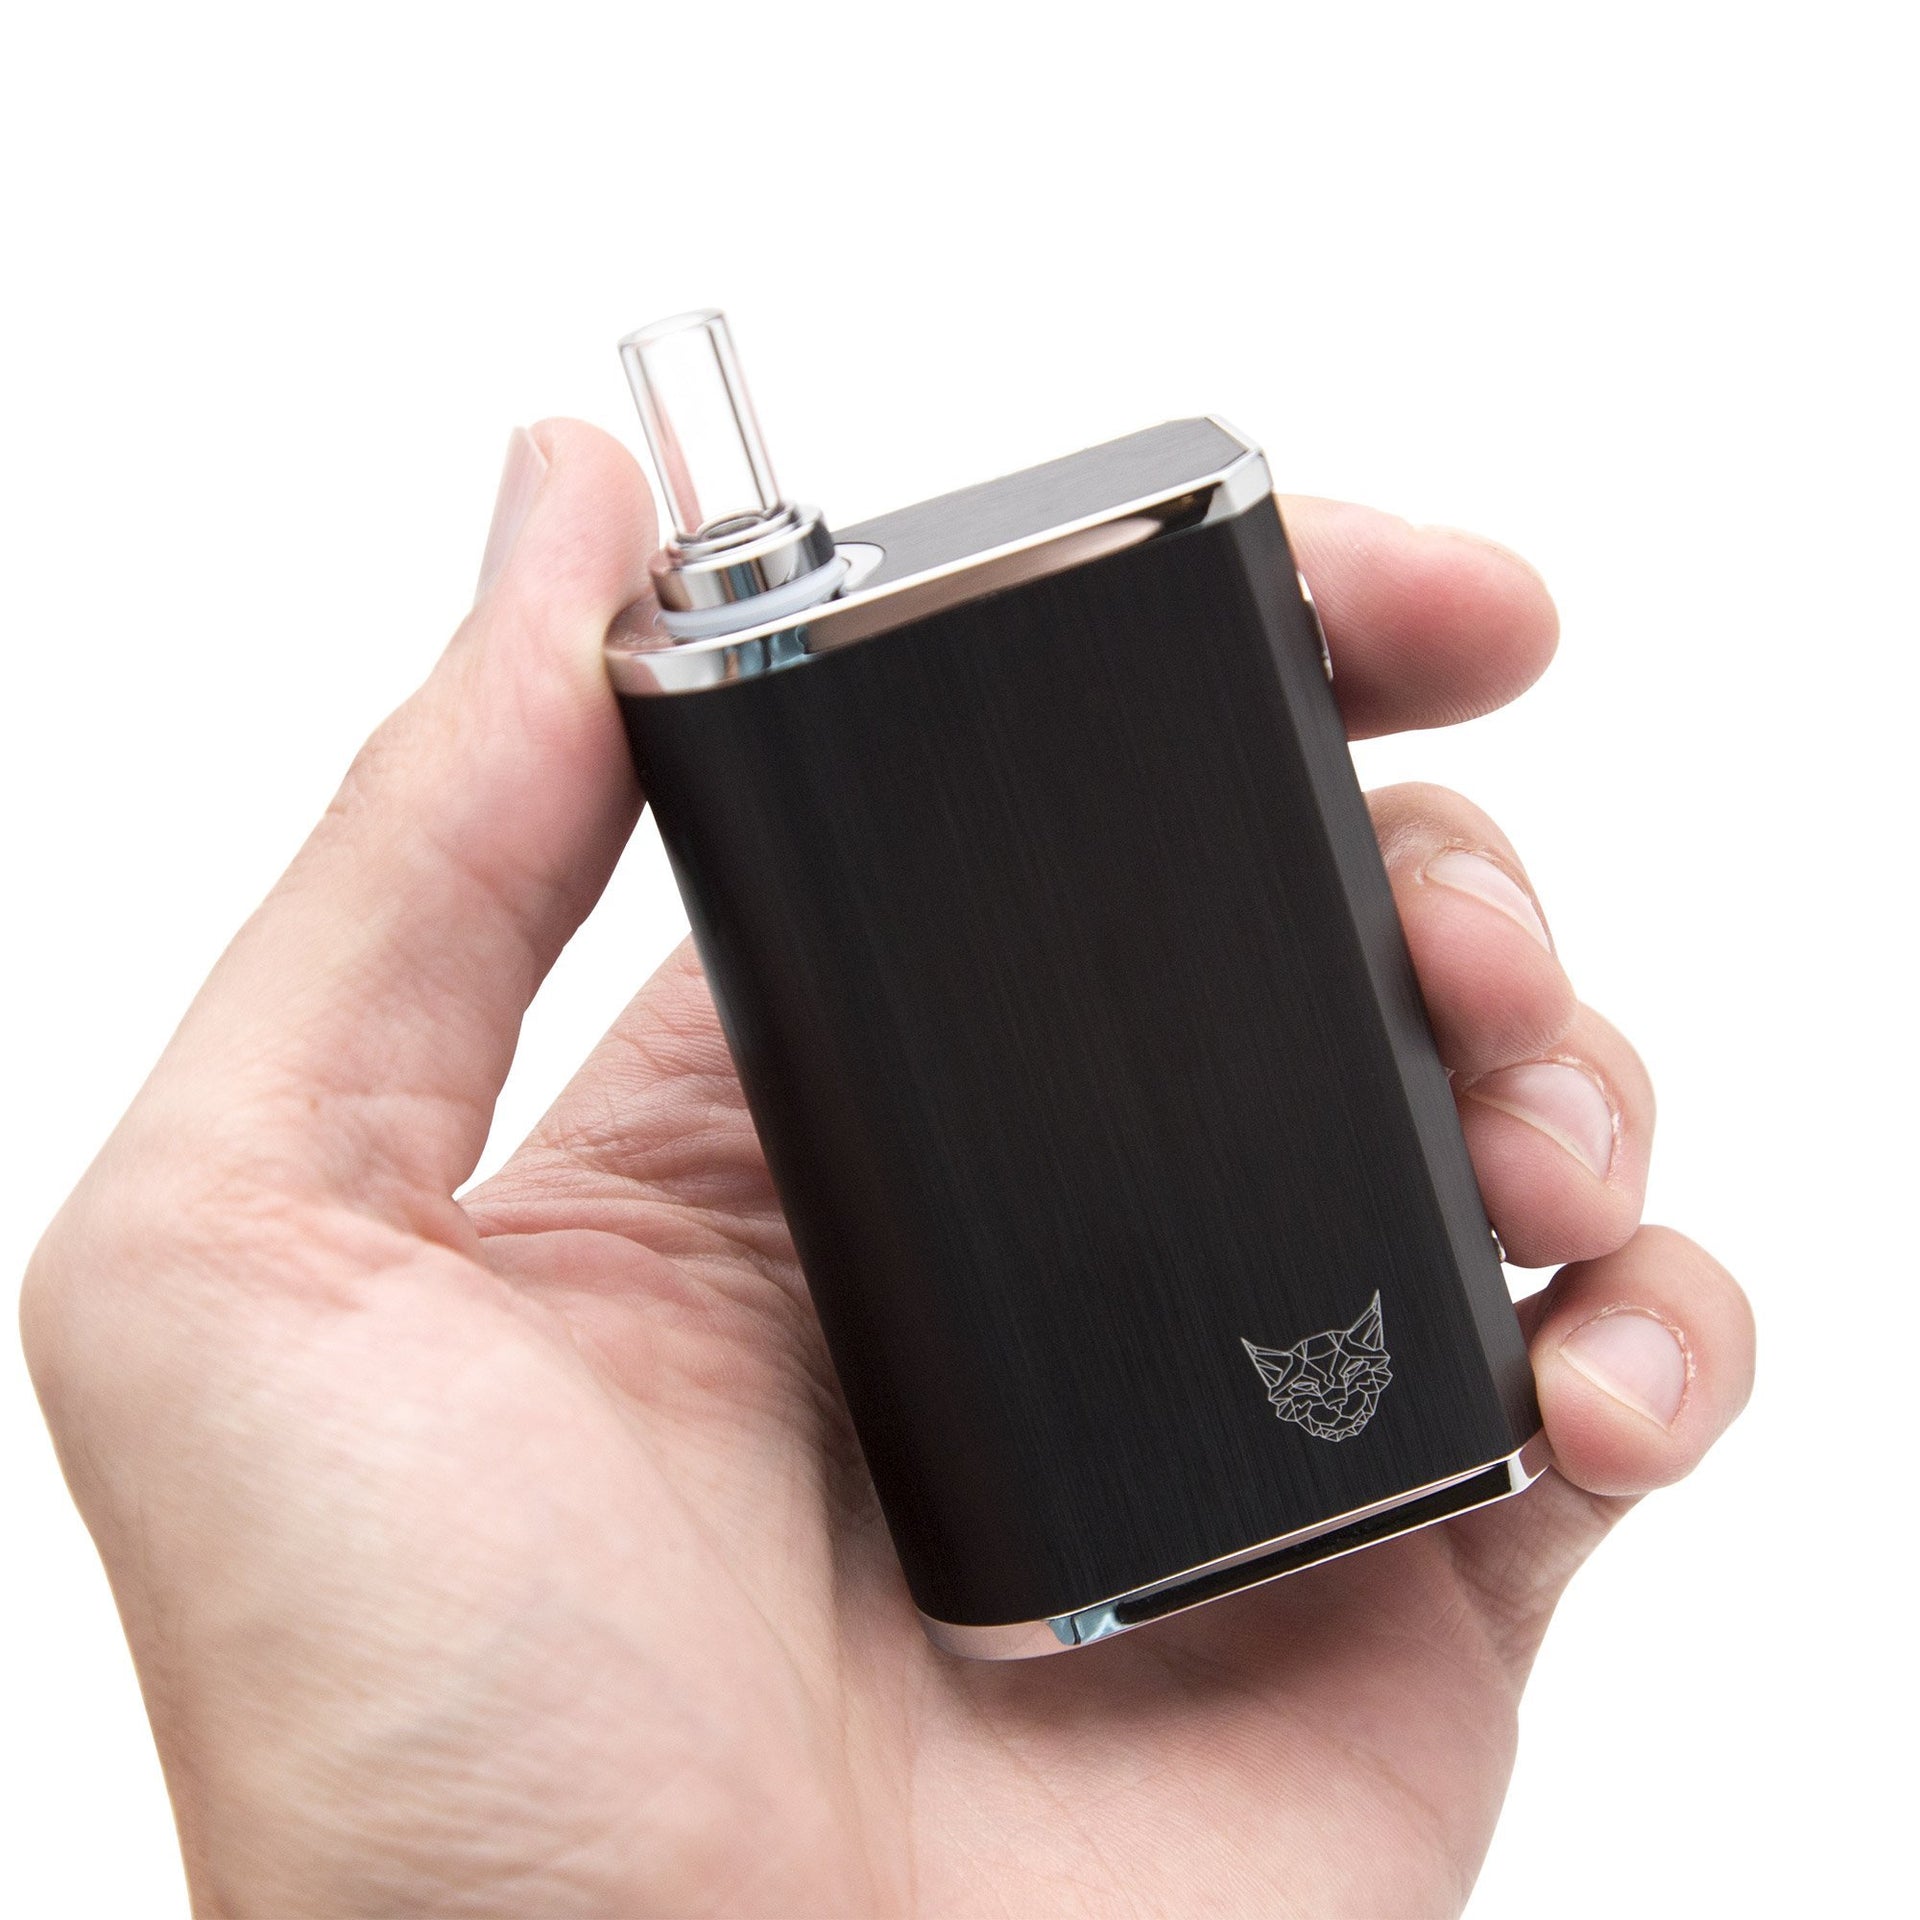 LINX Gaia Dry Herb Vaporizer - Onyx - 420 Science - The most trusted online smoke shop.